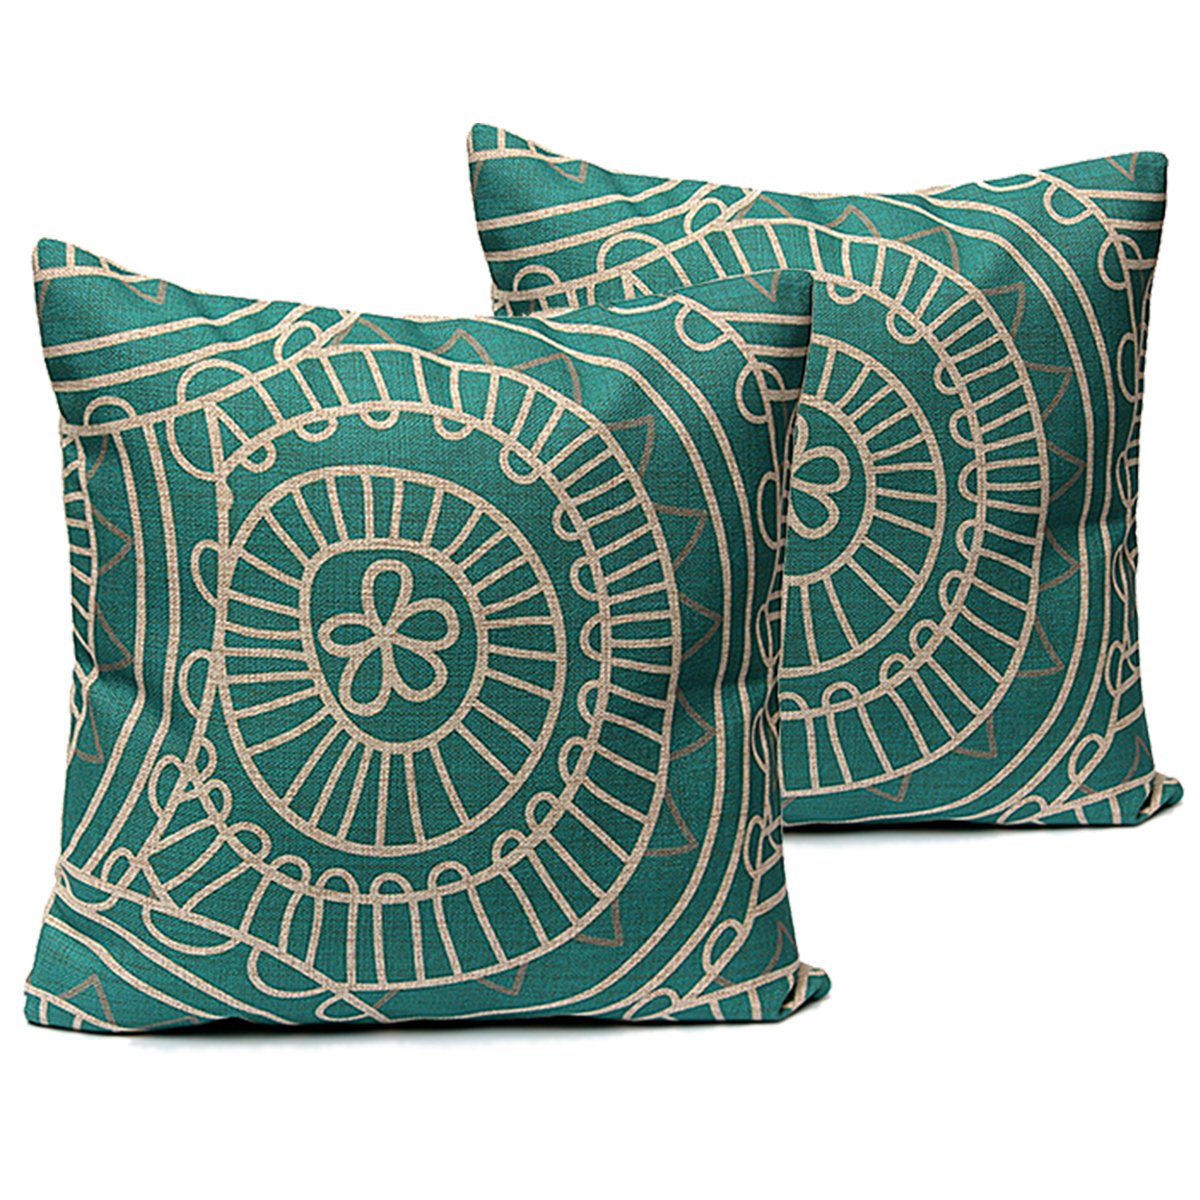 Minimalist-Style-Pillow-Case-Home-Linen-Cushion-Cover-Fashion-Colorful-Geometric-Patterns-951098-5